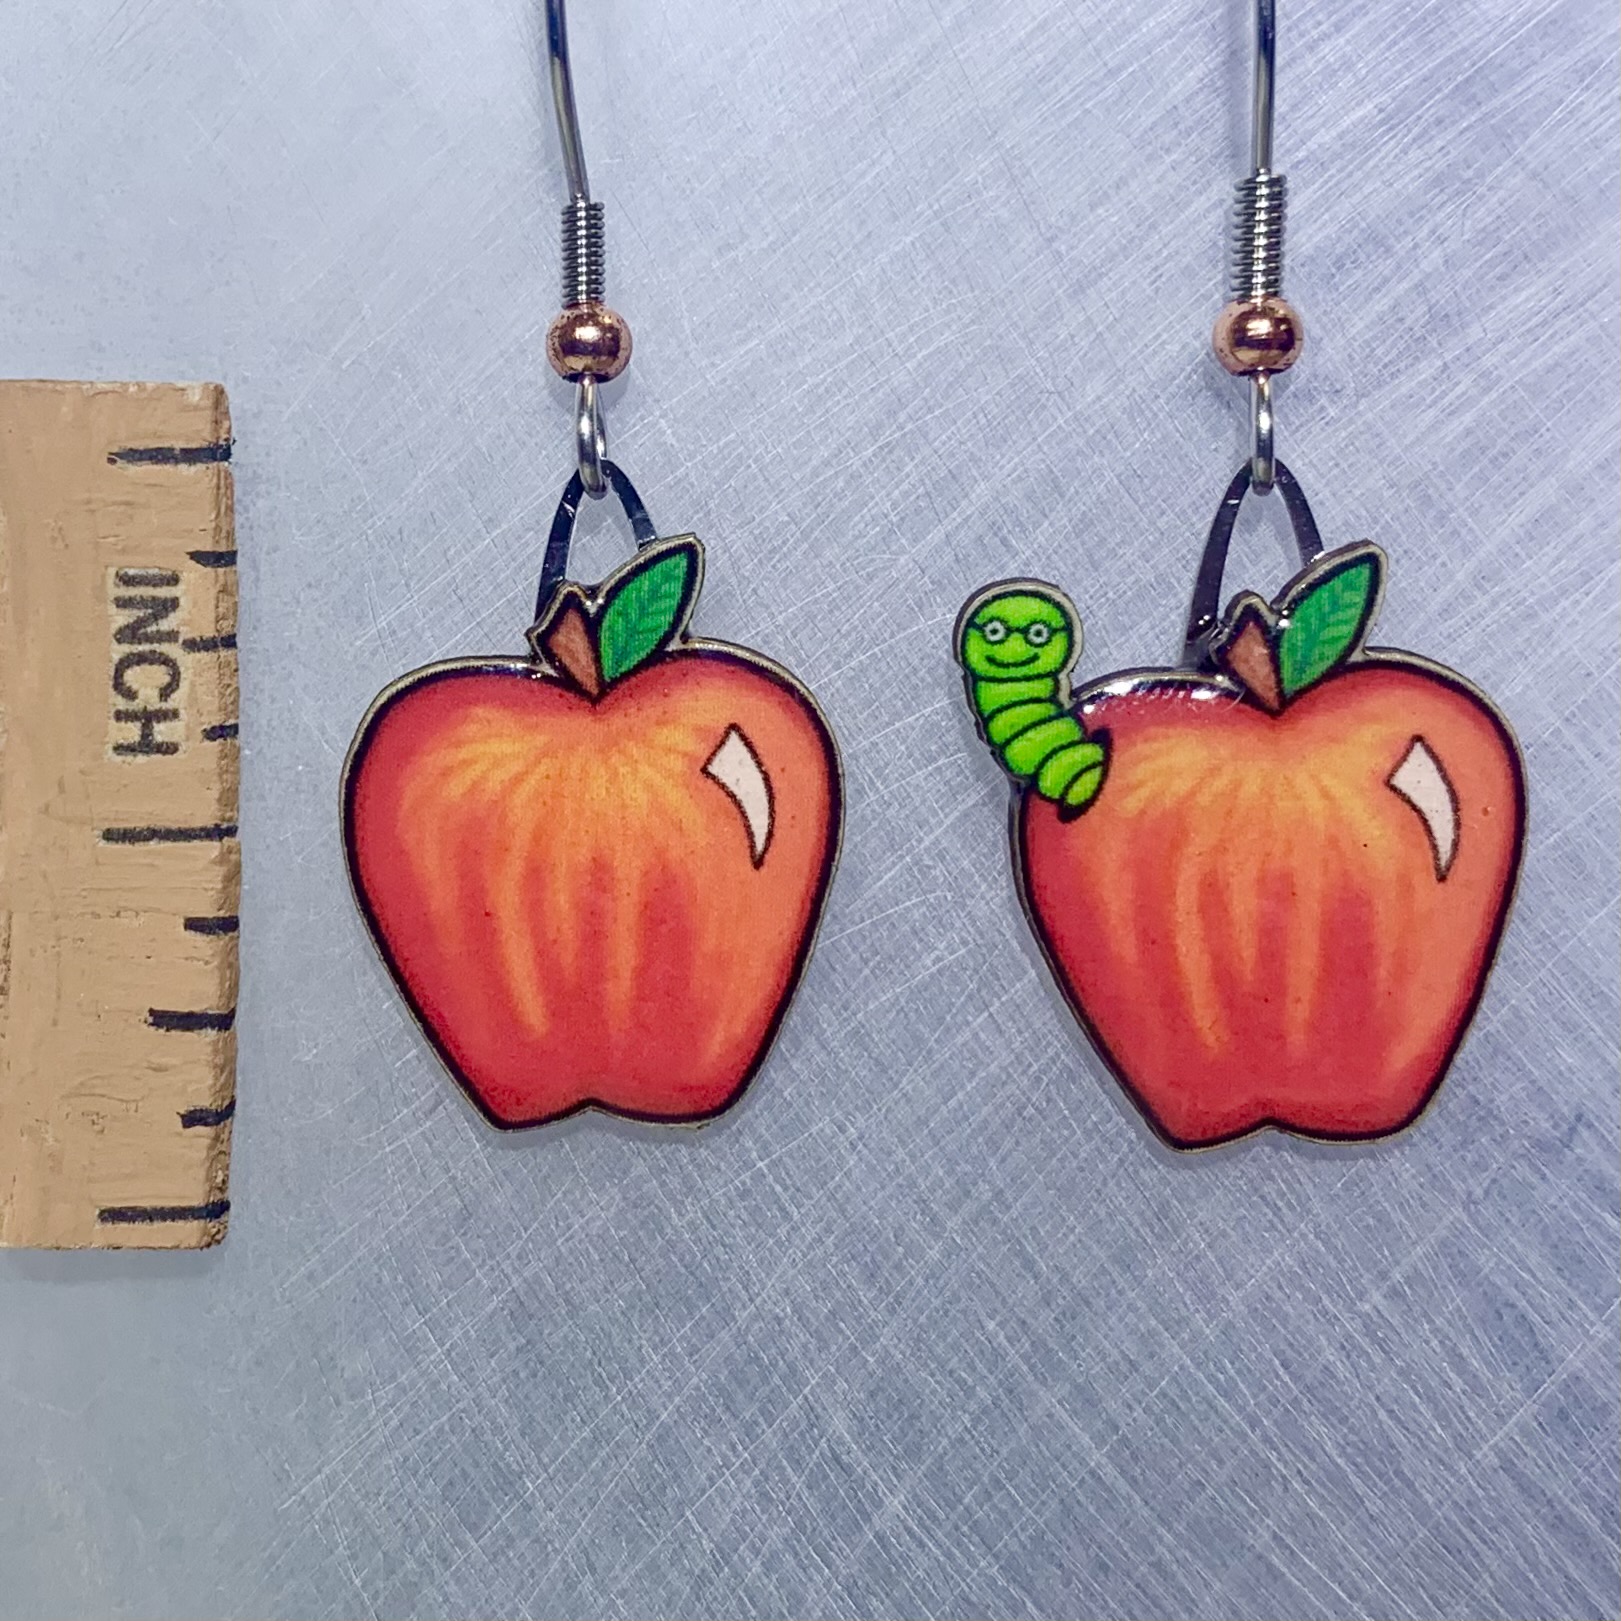 Picture shown is of 1 inch tall pair of earrings of Apple & Worm.